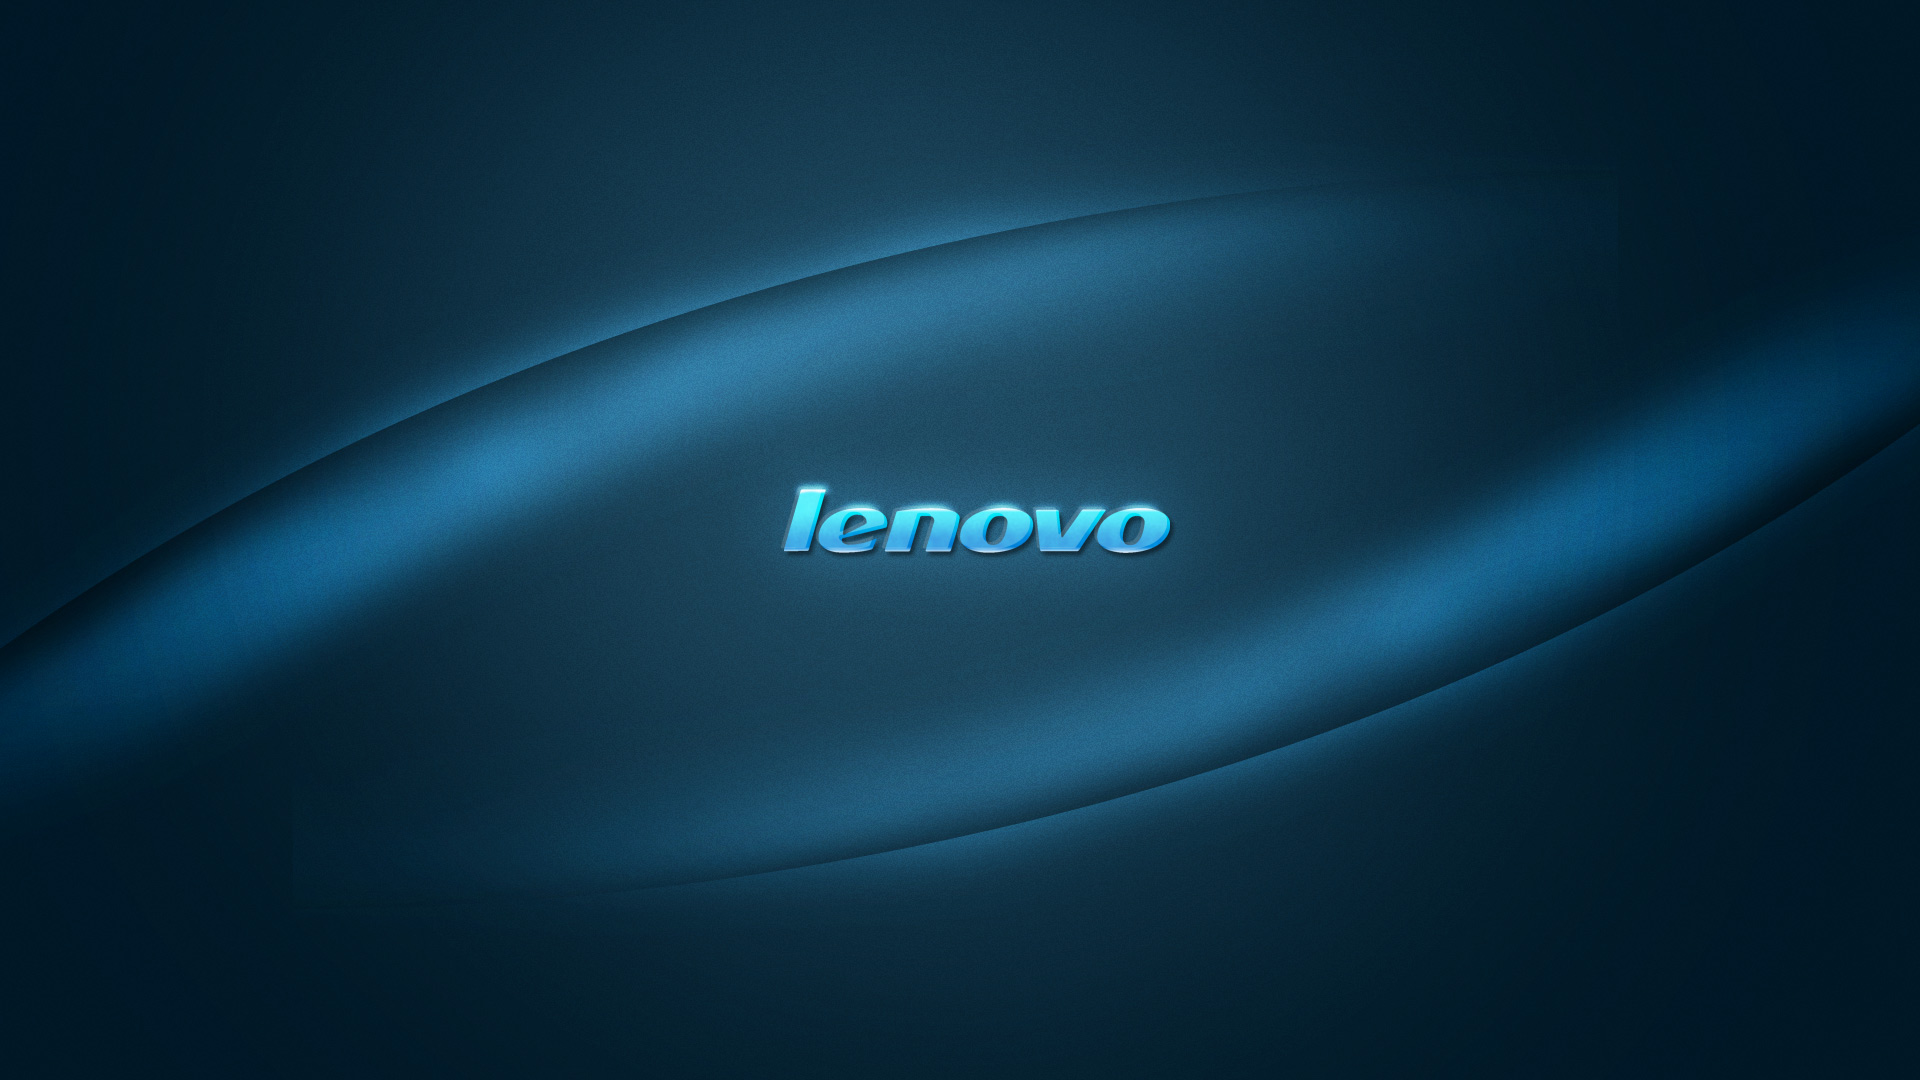  found for Comedyoutlet Lenovo Wallpaper Collection In Hd For Download